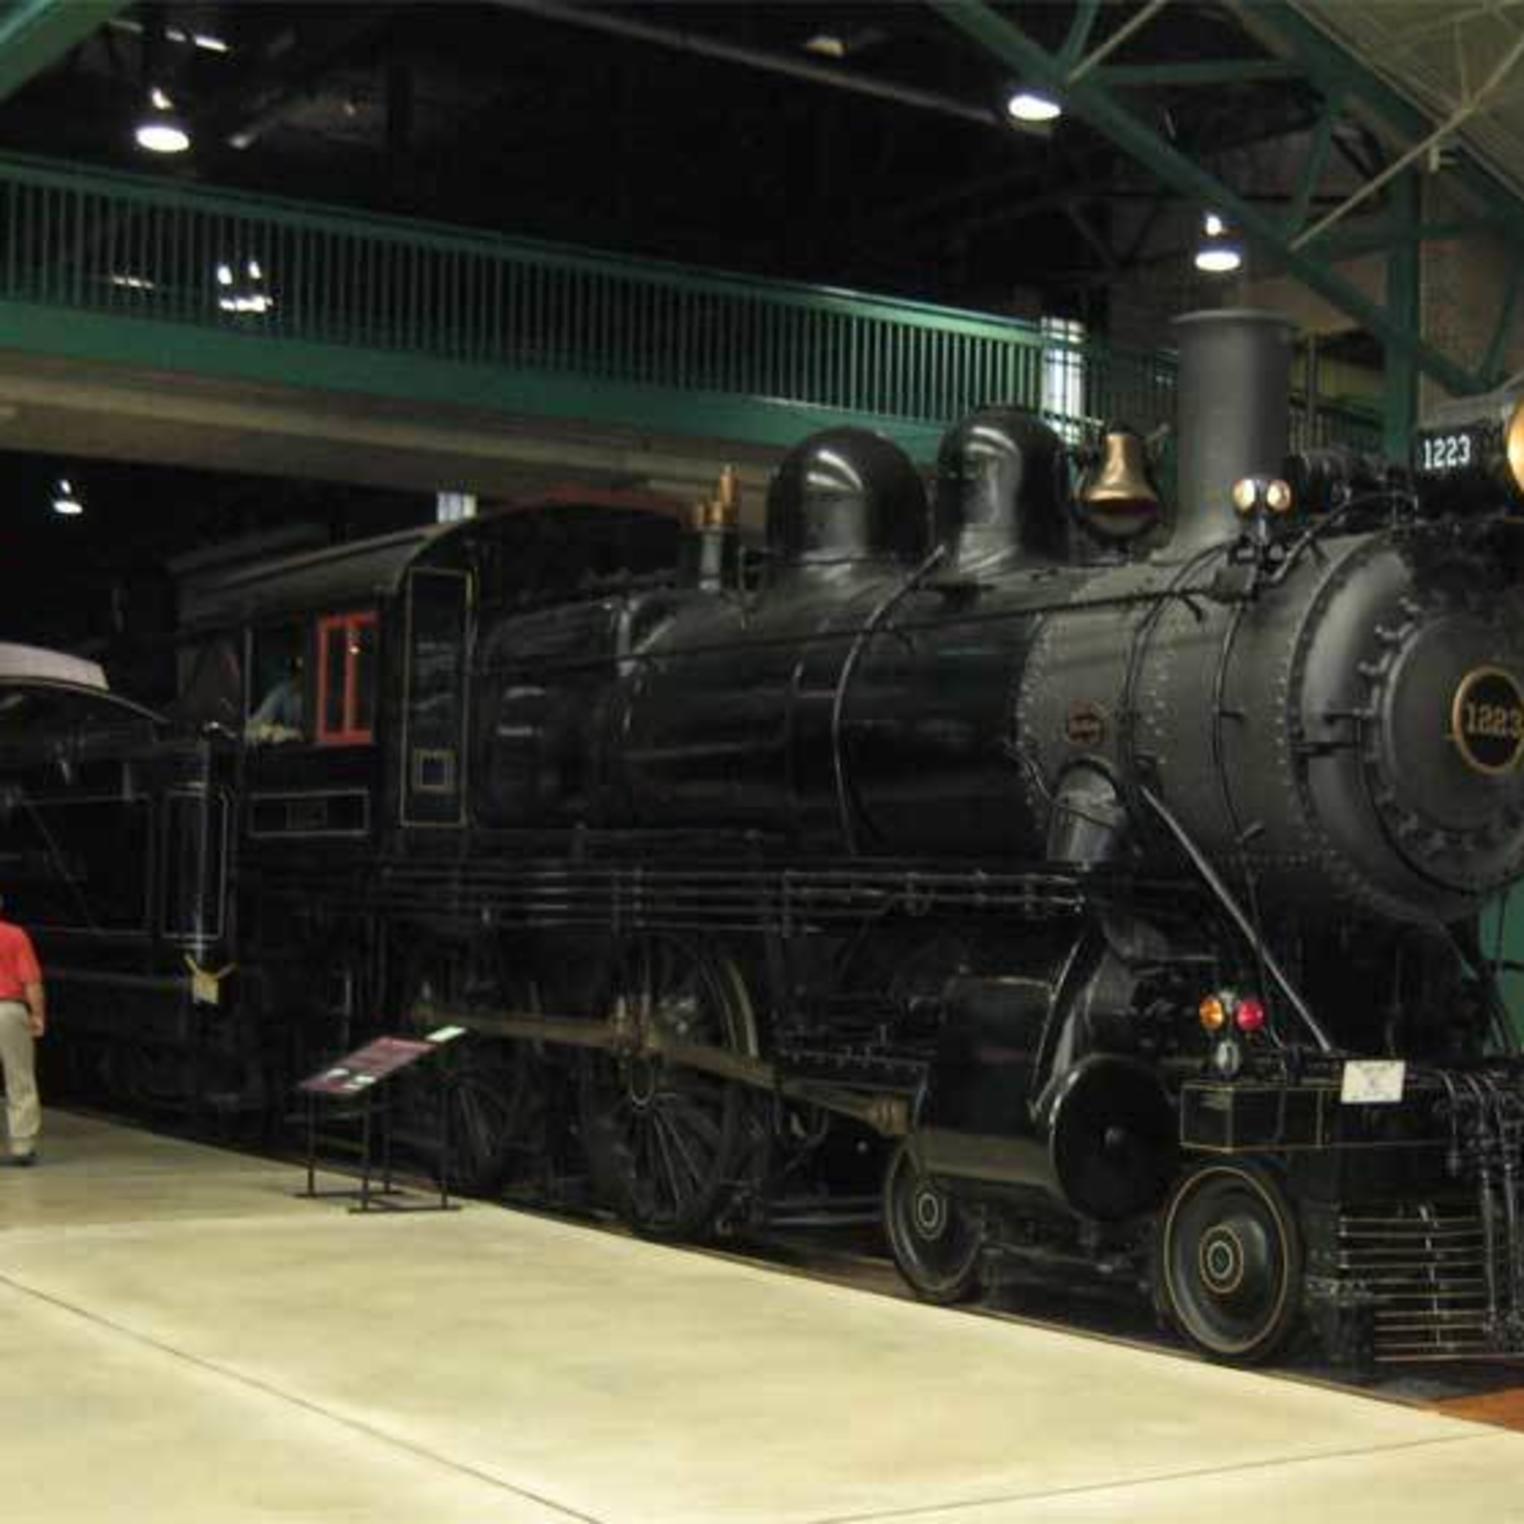 The Railroad Museum of PA